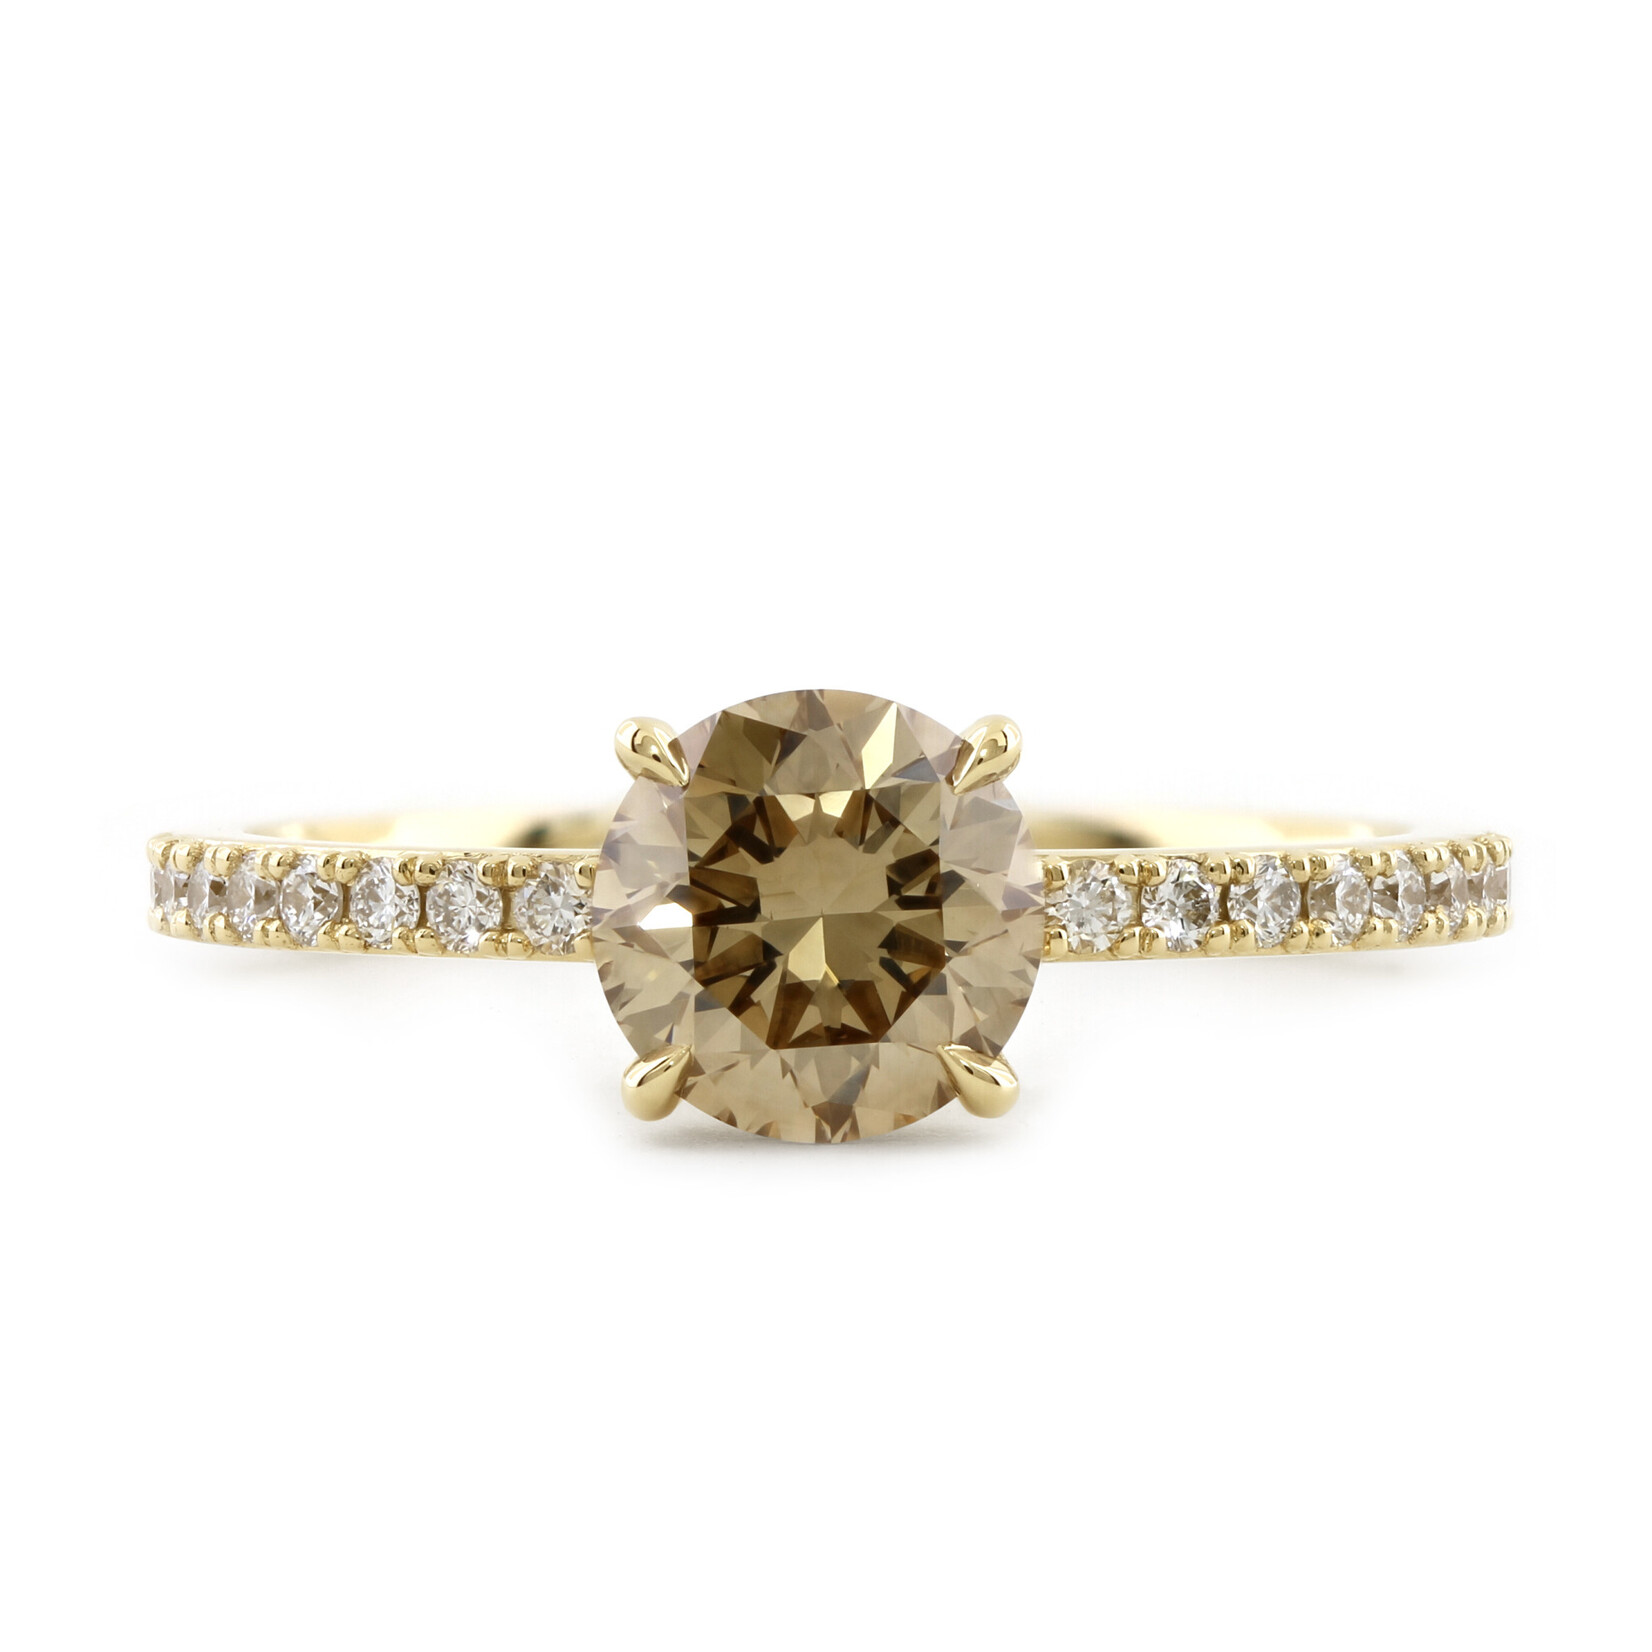 Baxter Moerman Grace Engagement Ring with Champagne Diamond